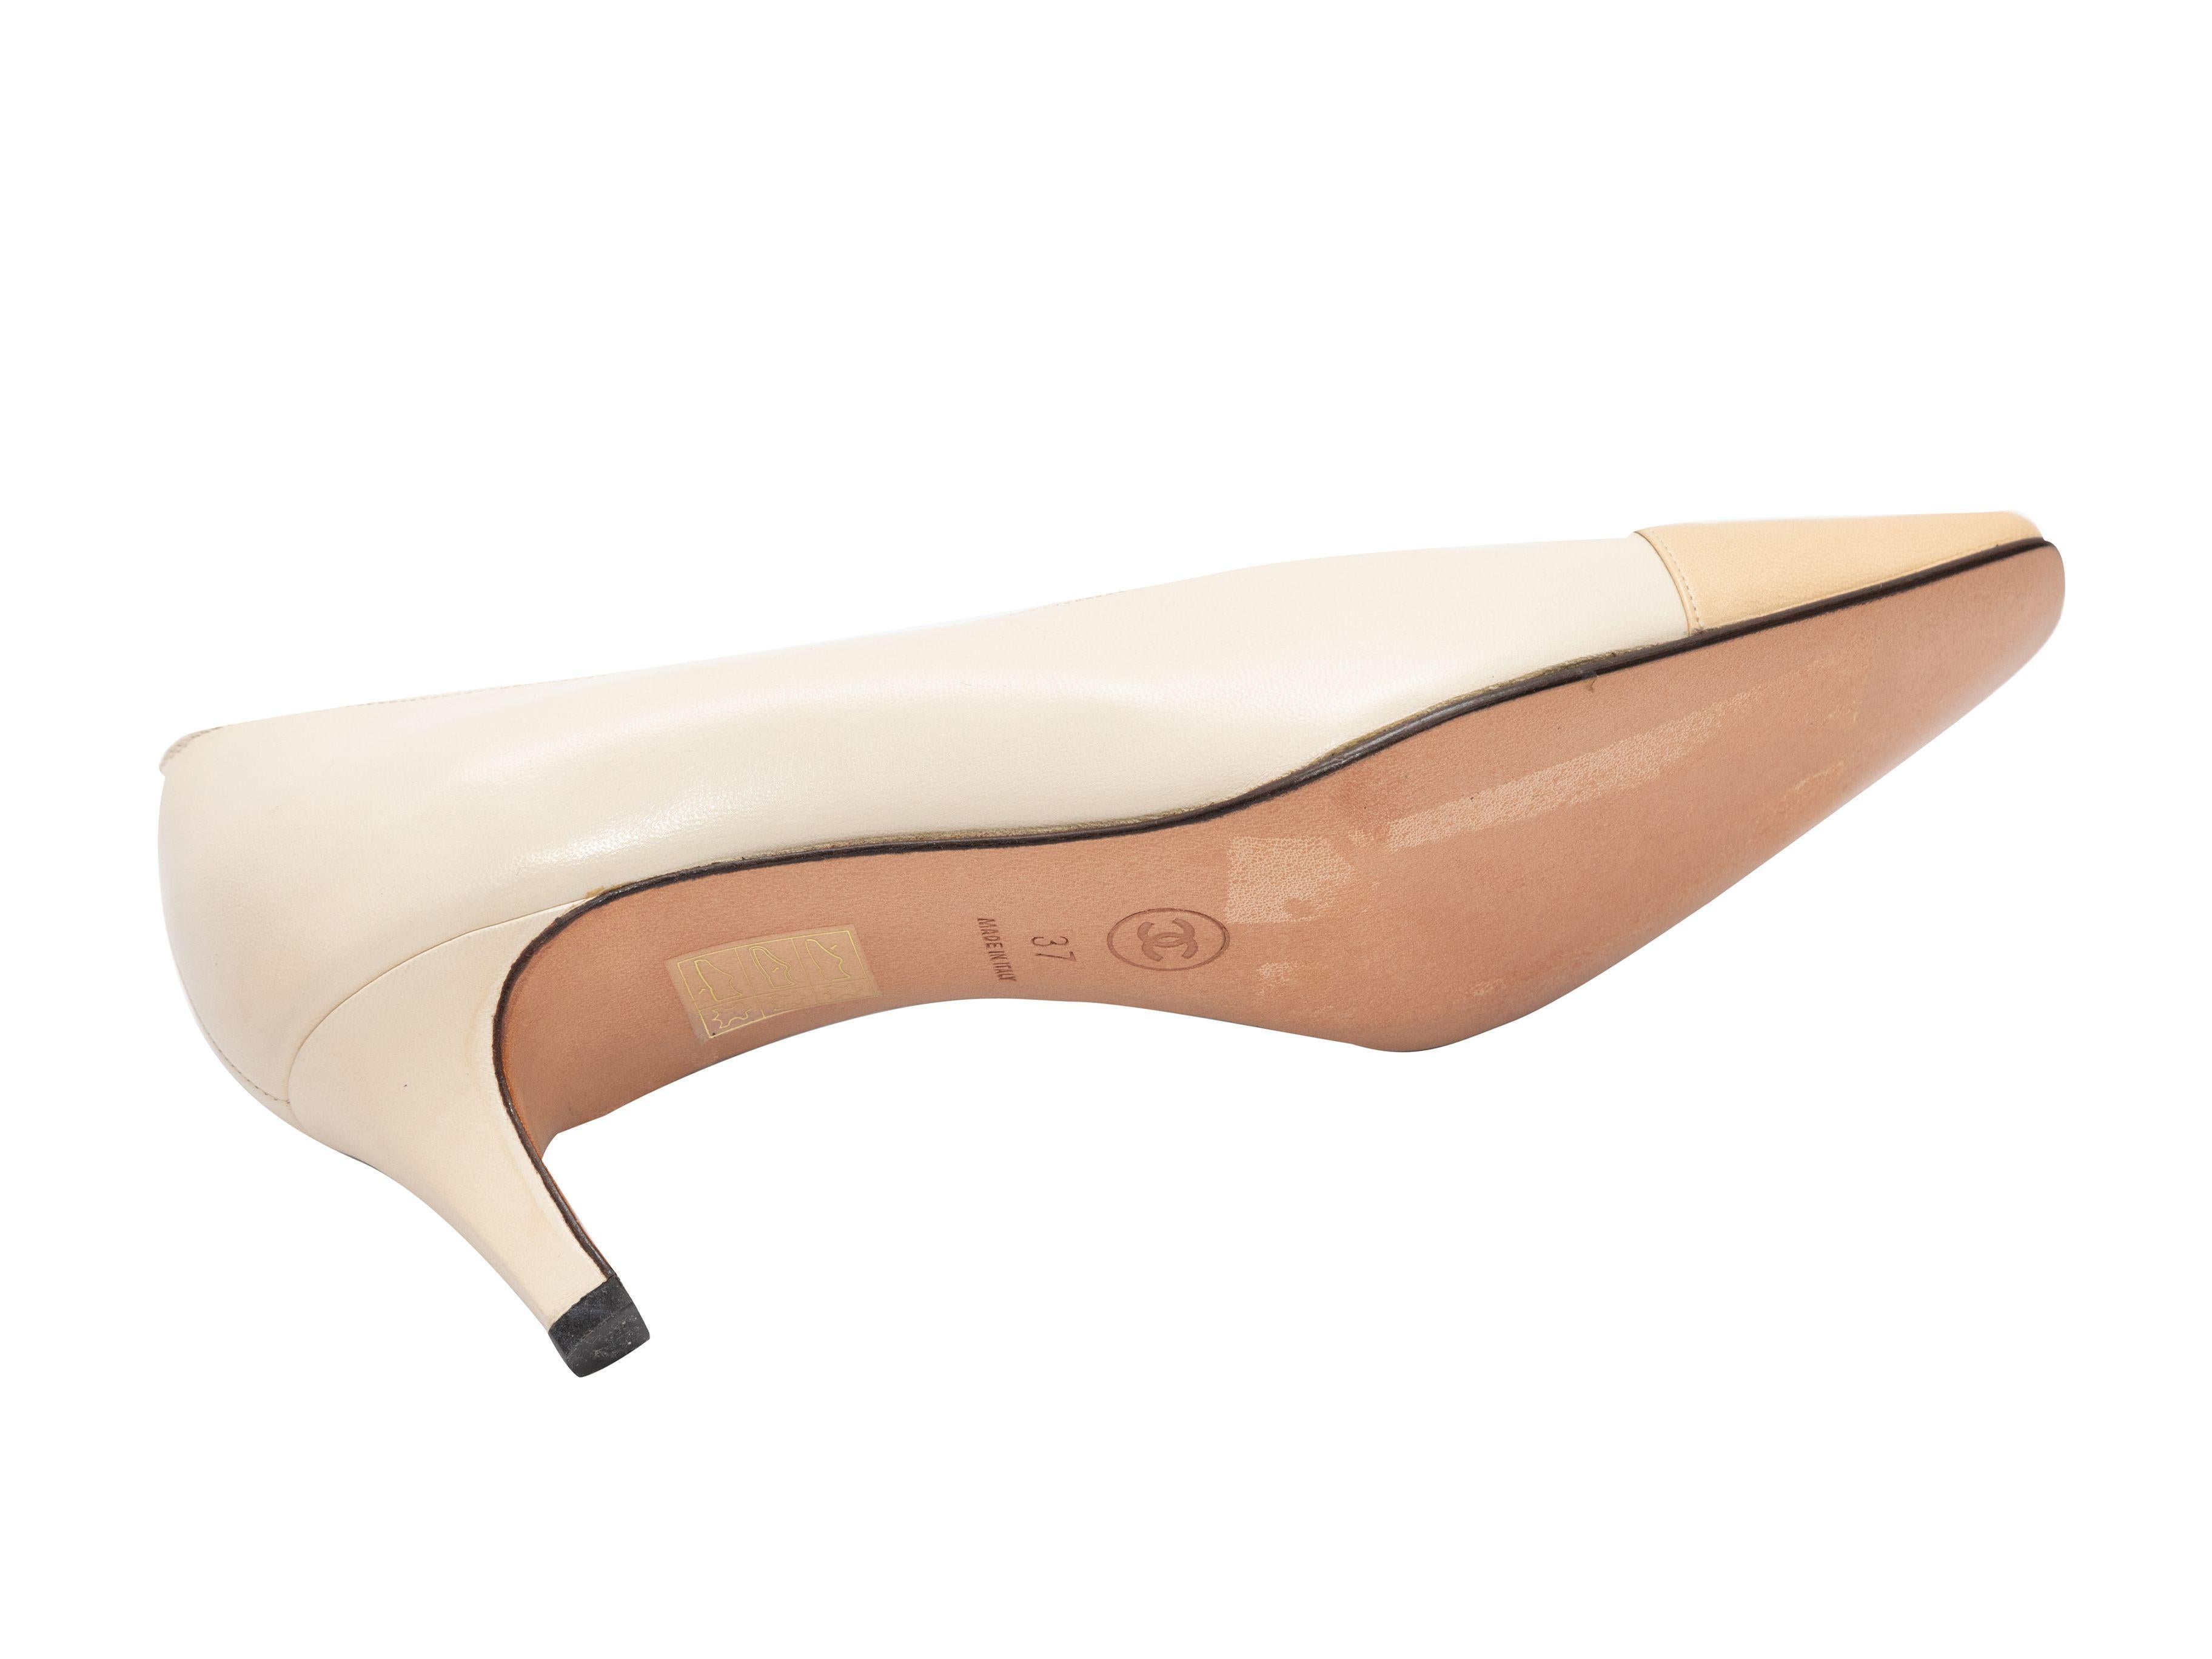 Product Details: Cream and beige cap-toe pumps by Chanel. Kitten heels. 2